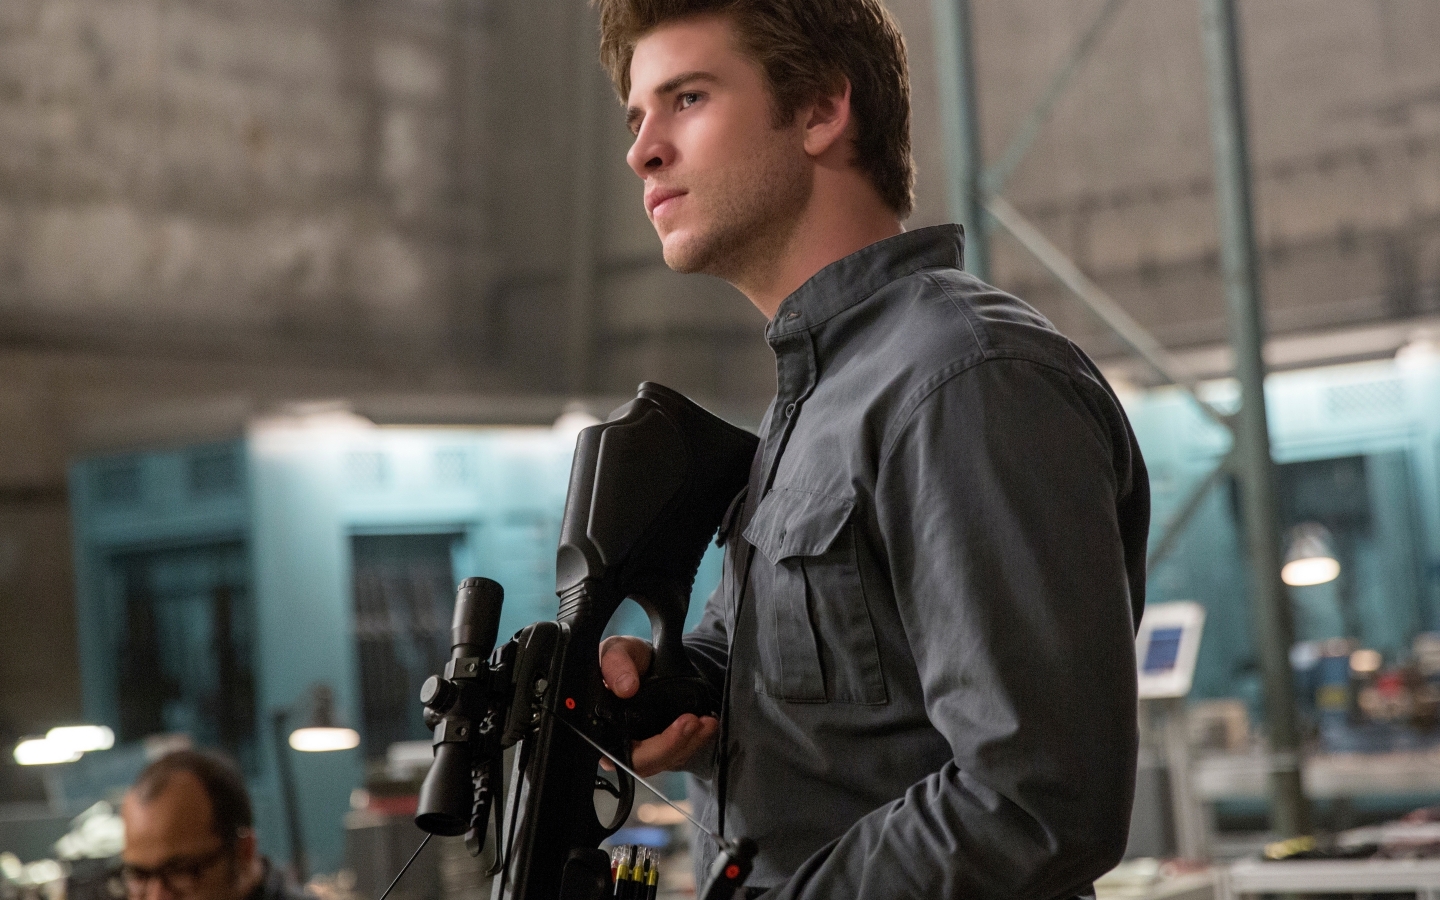 Liam Hemsworth in The Hunger Games for 1440 x 900 widescreen resolution